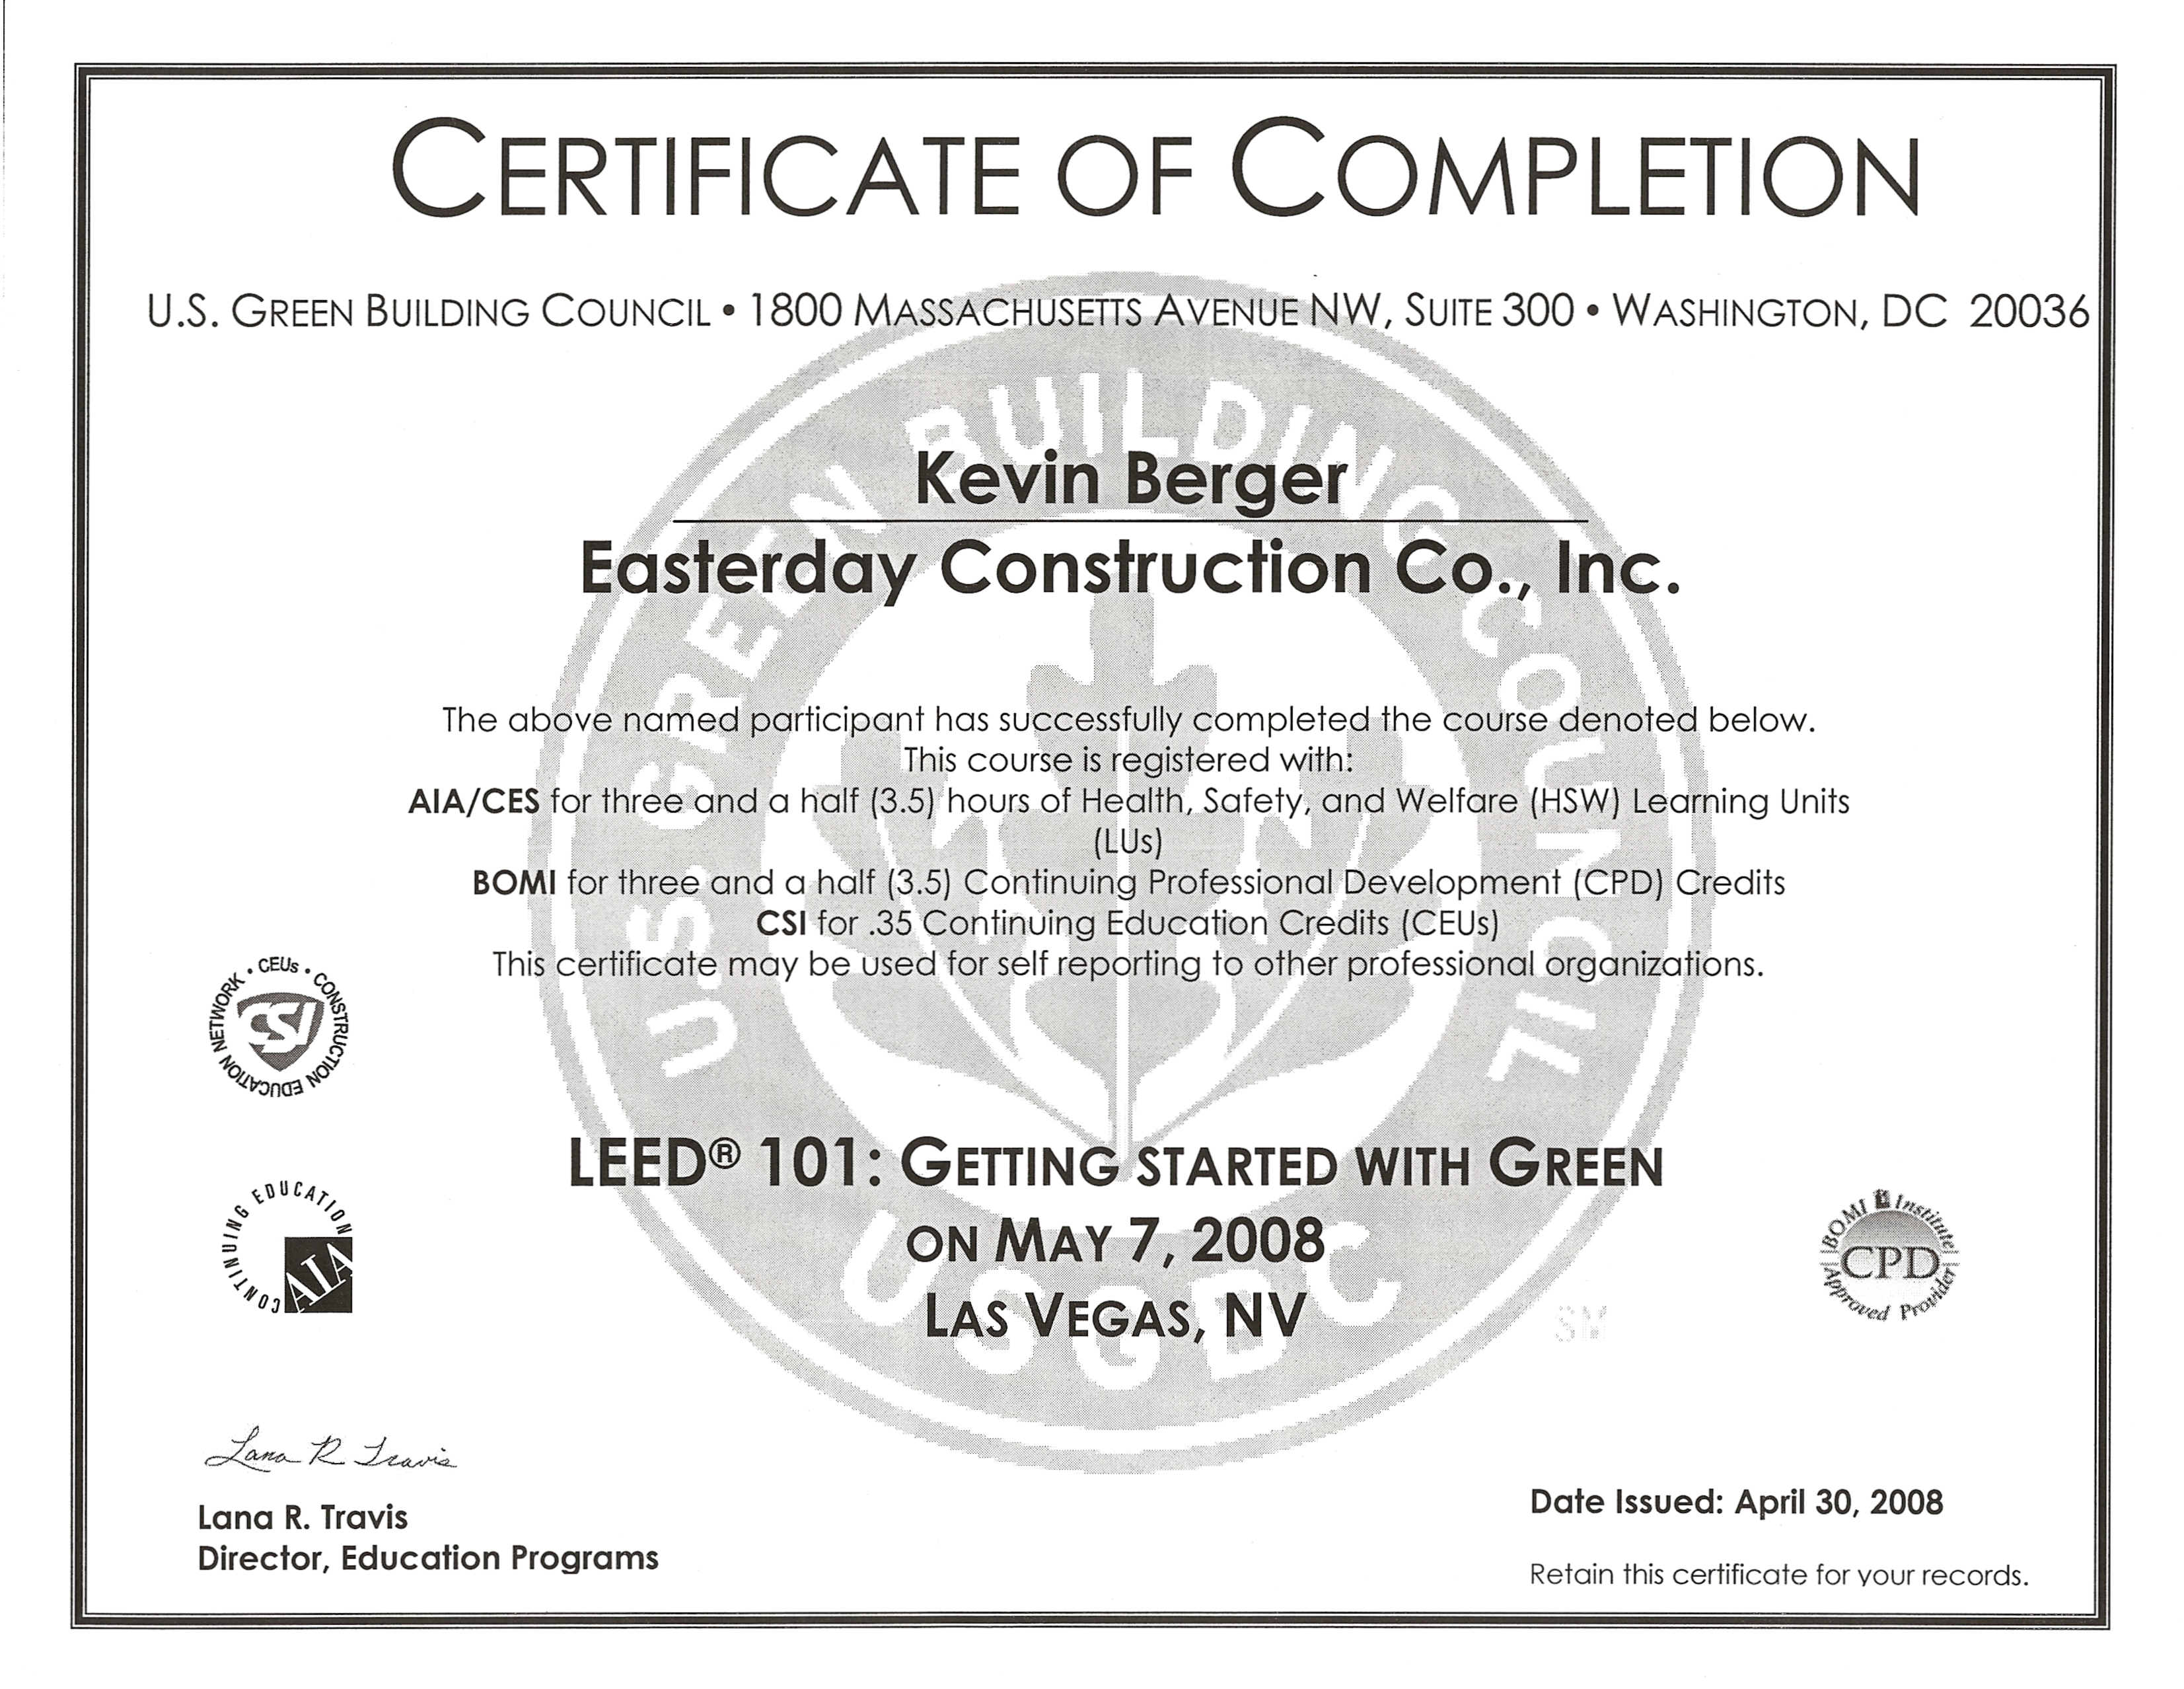 21 Certificate Of Completion PSD Images - Internship Completion Inside Certificate Of Completion Template Construction